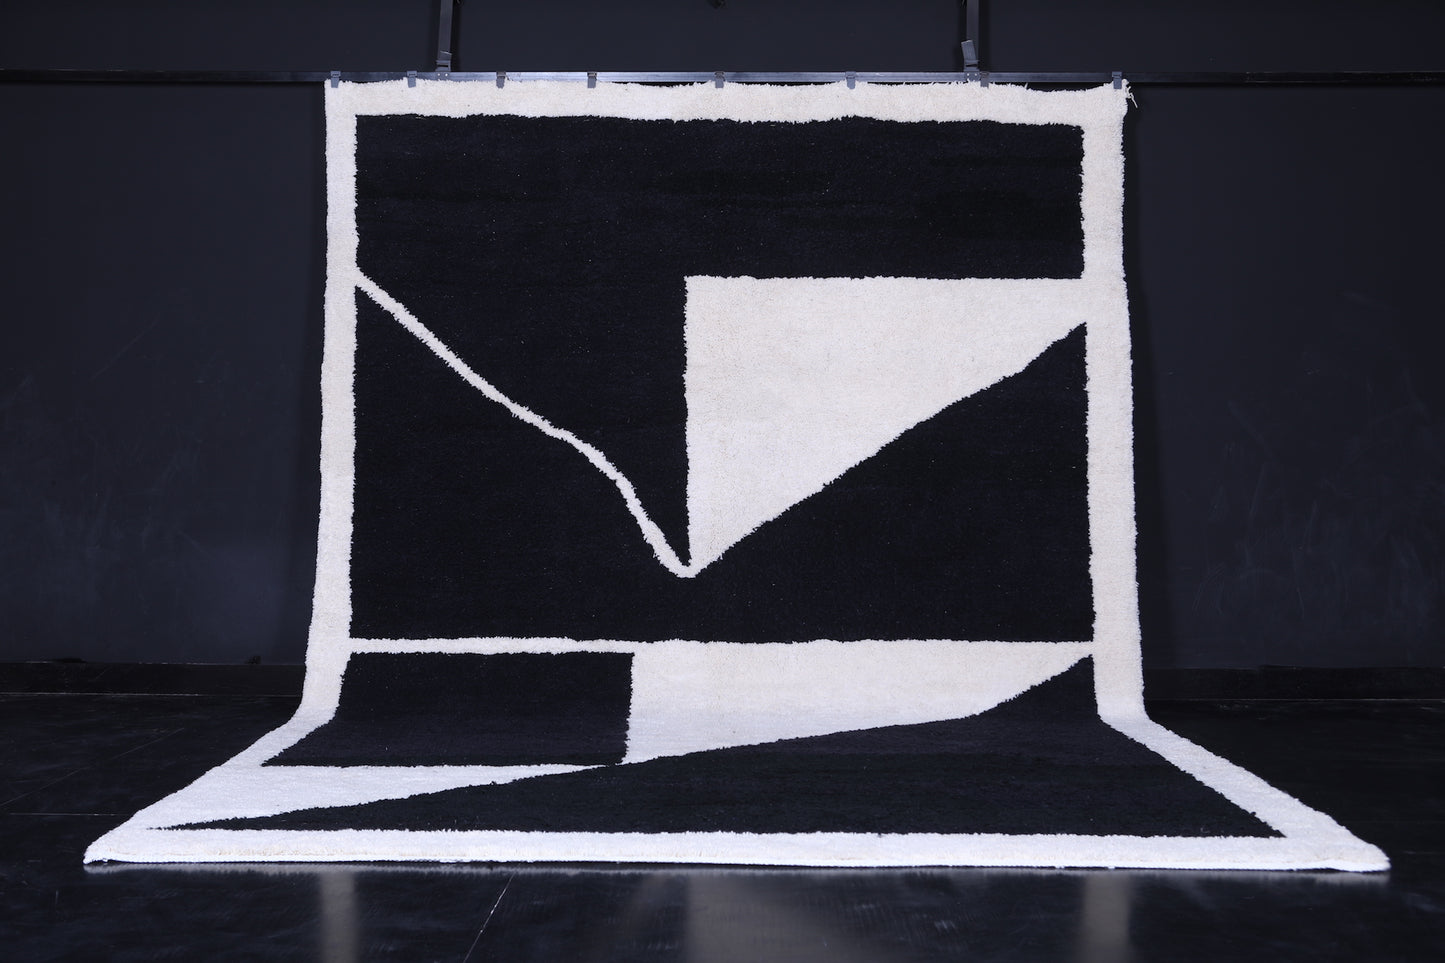 Contemporary rug - Black white rug - all wool